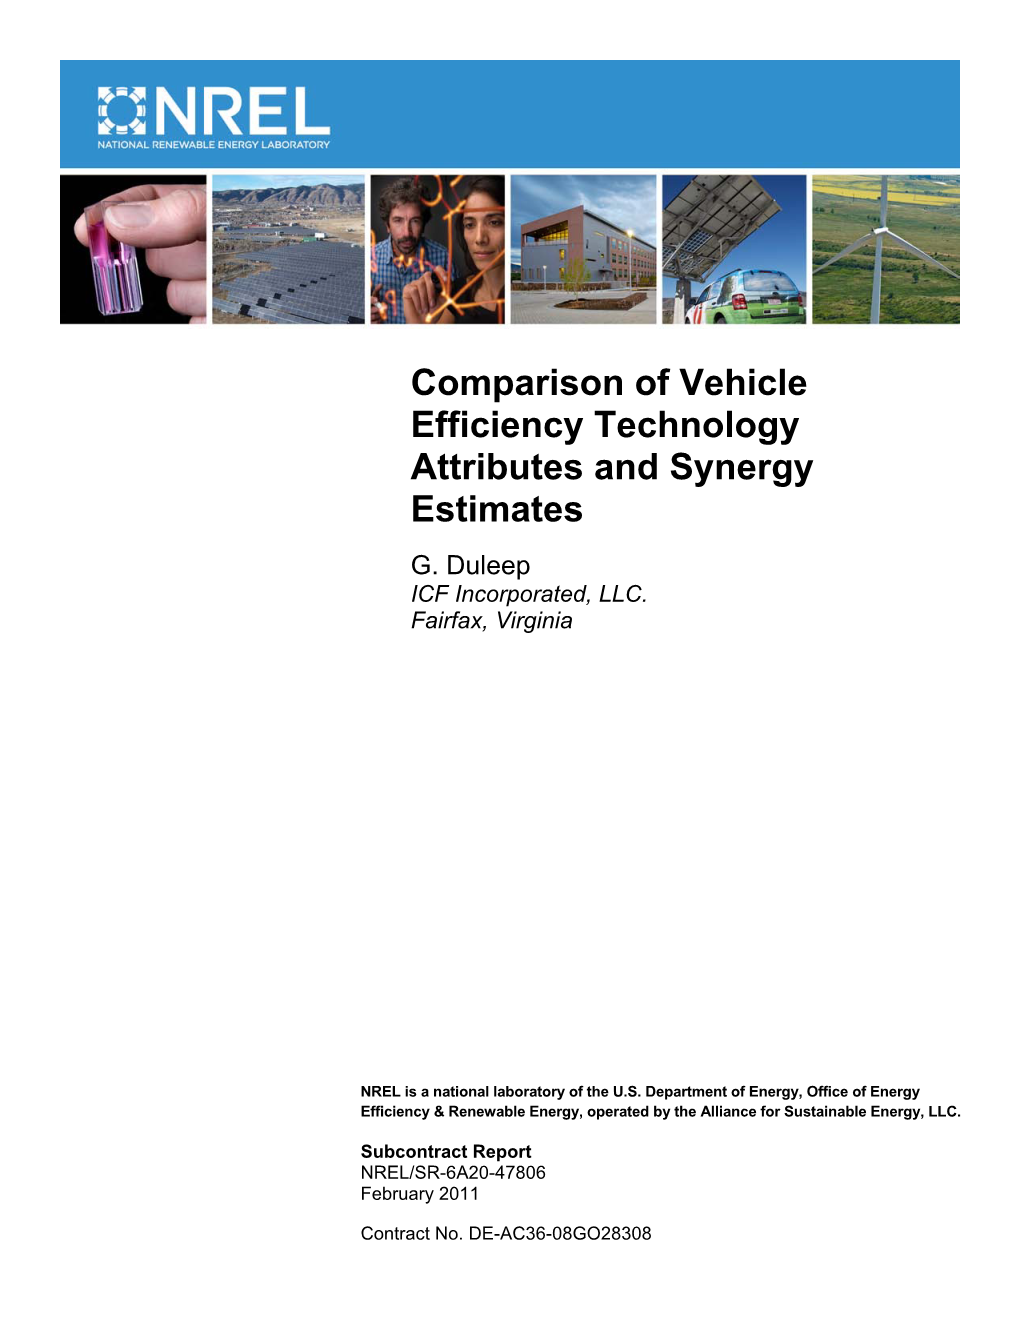 Comparison of Vehicle Efficiency Technology Attributes and Synergy Estimates G